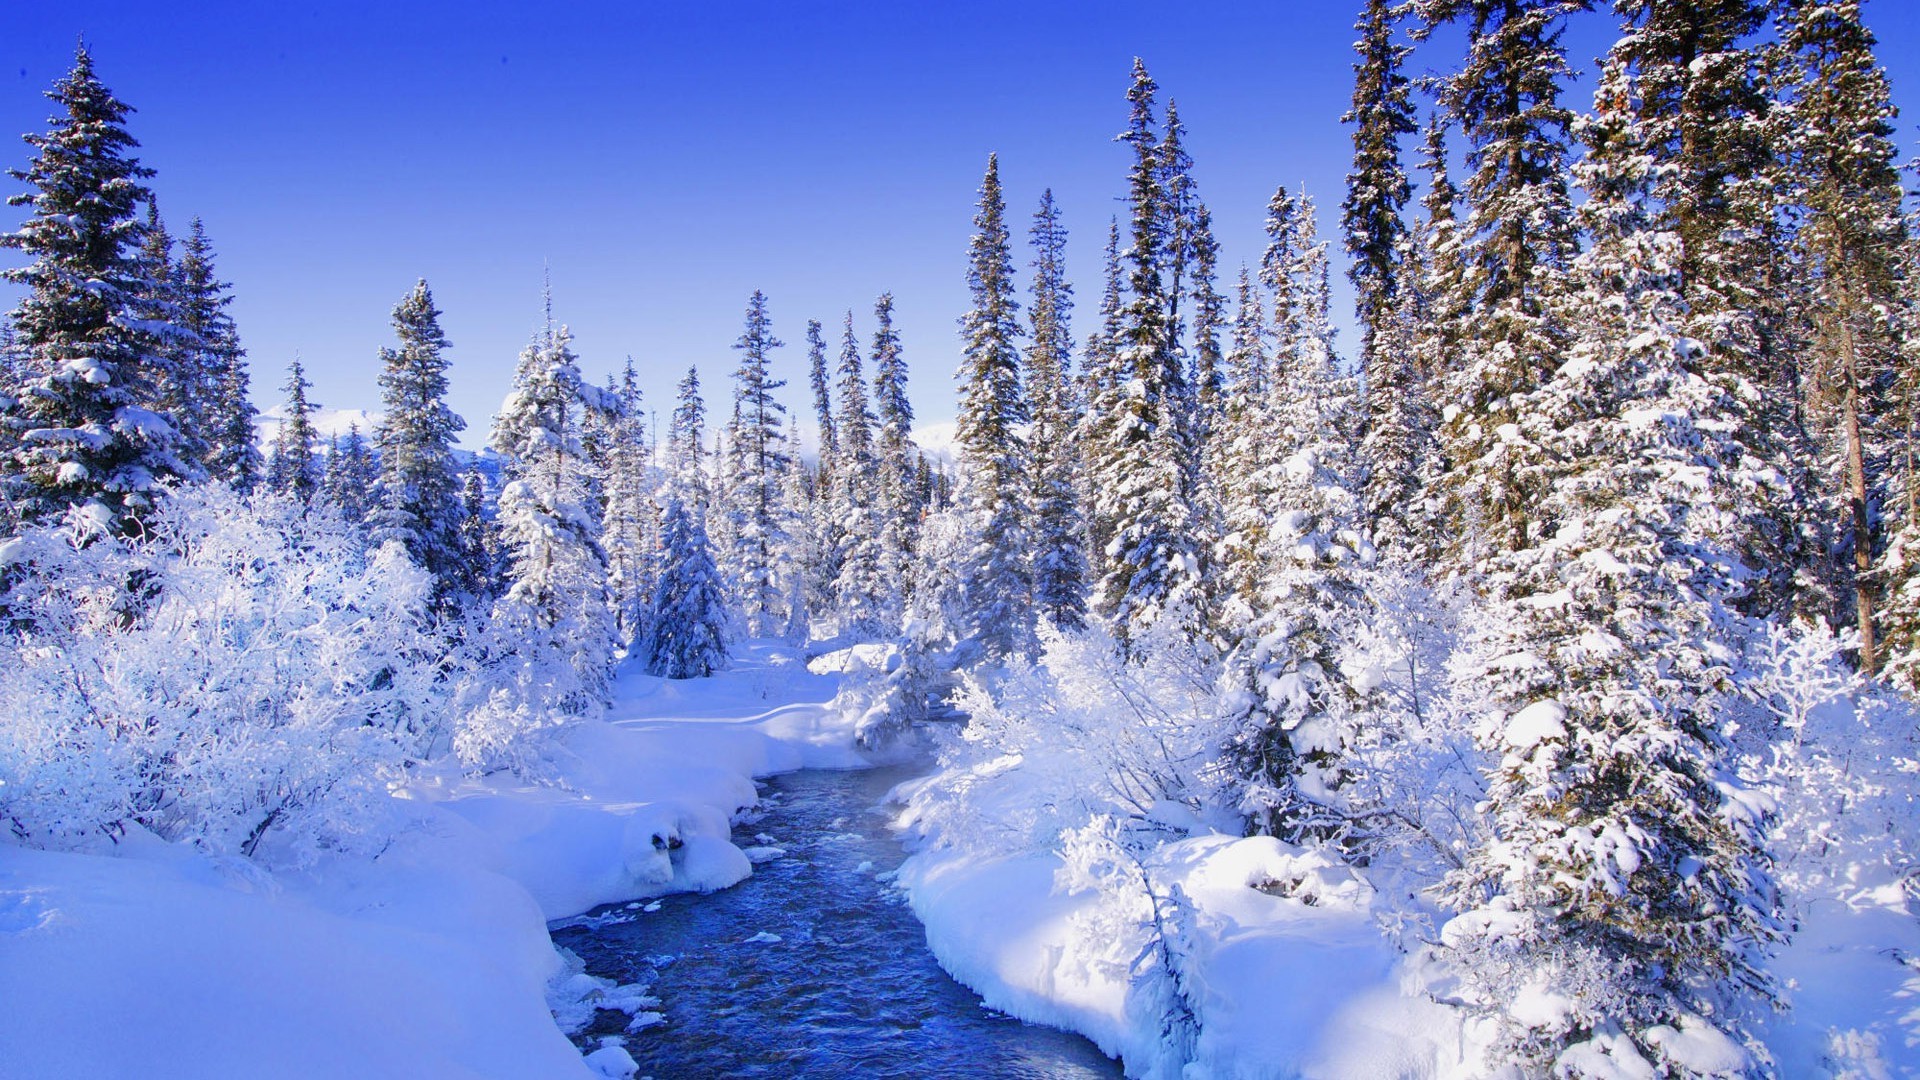 rivers ponds and streams snow winter cold frost wood ice scenic mountain frozen landscape season tree nature fair weather evergreen conifer weather